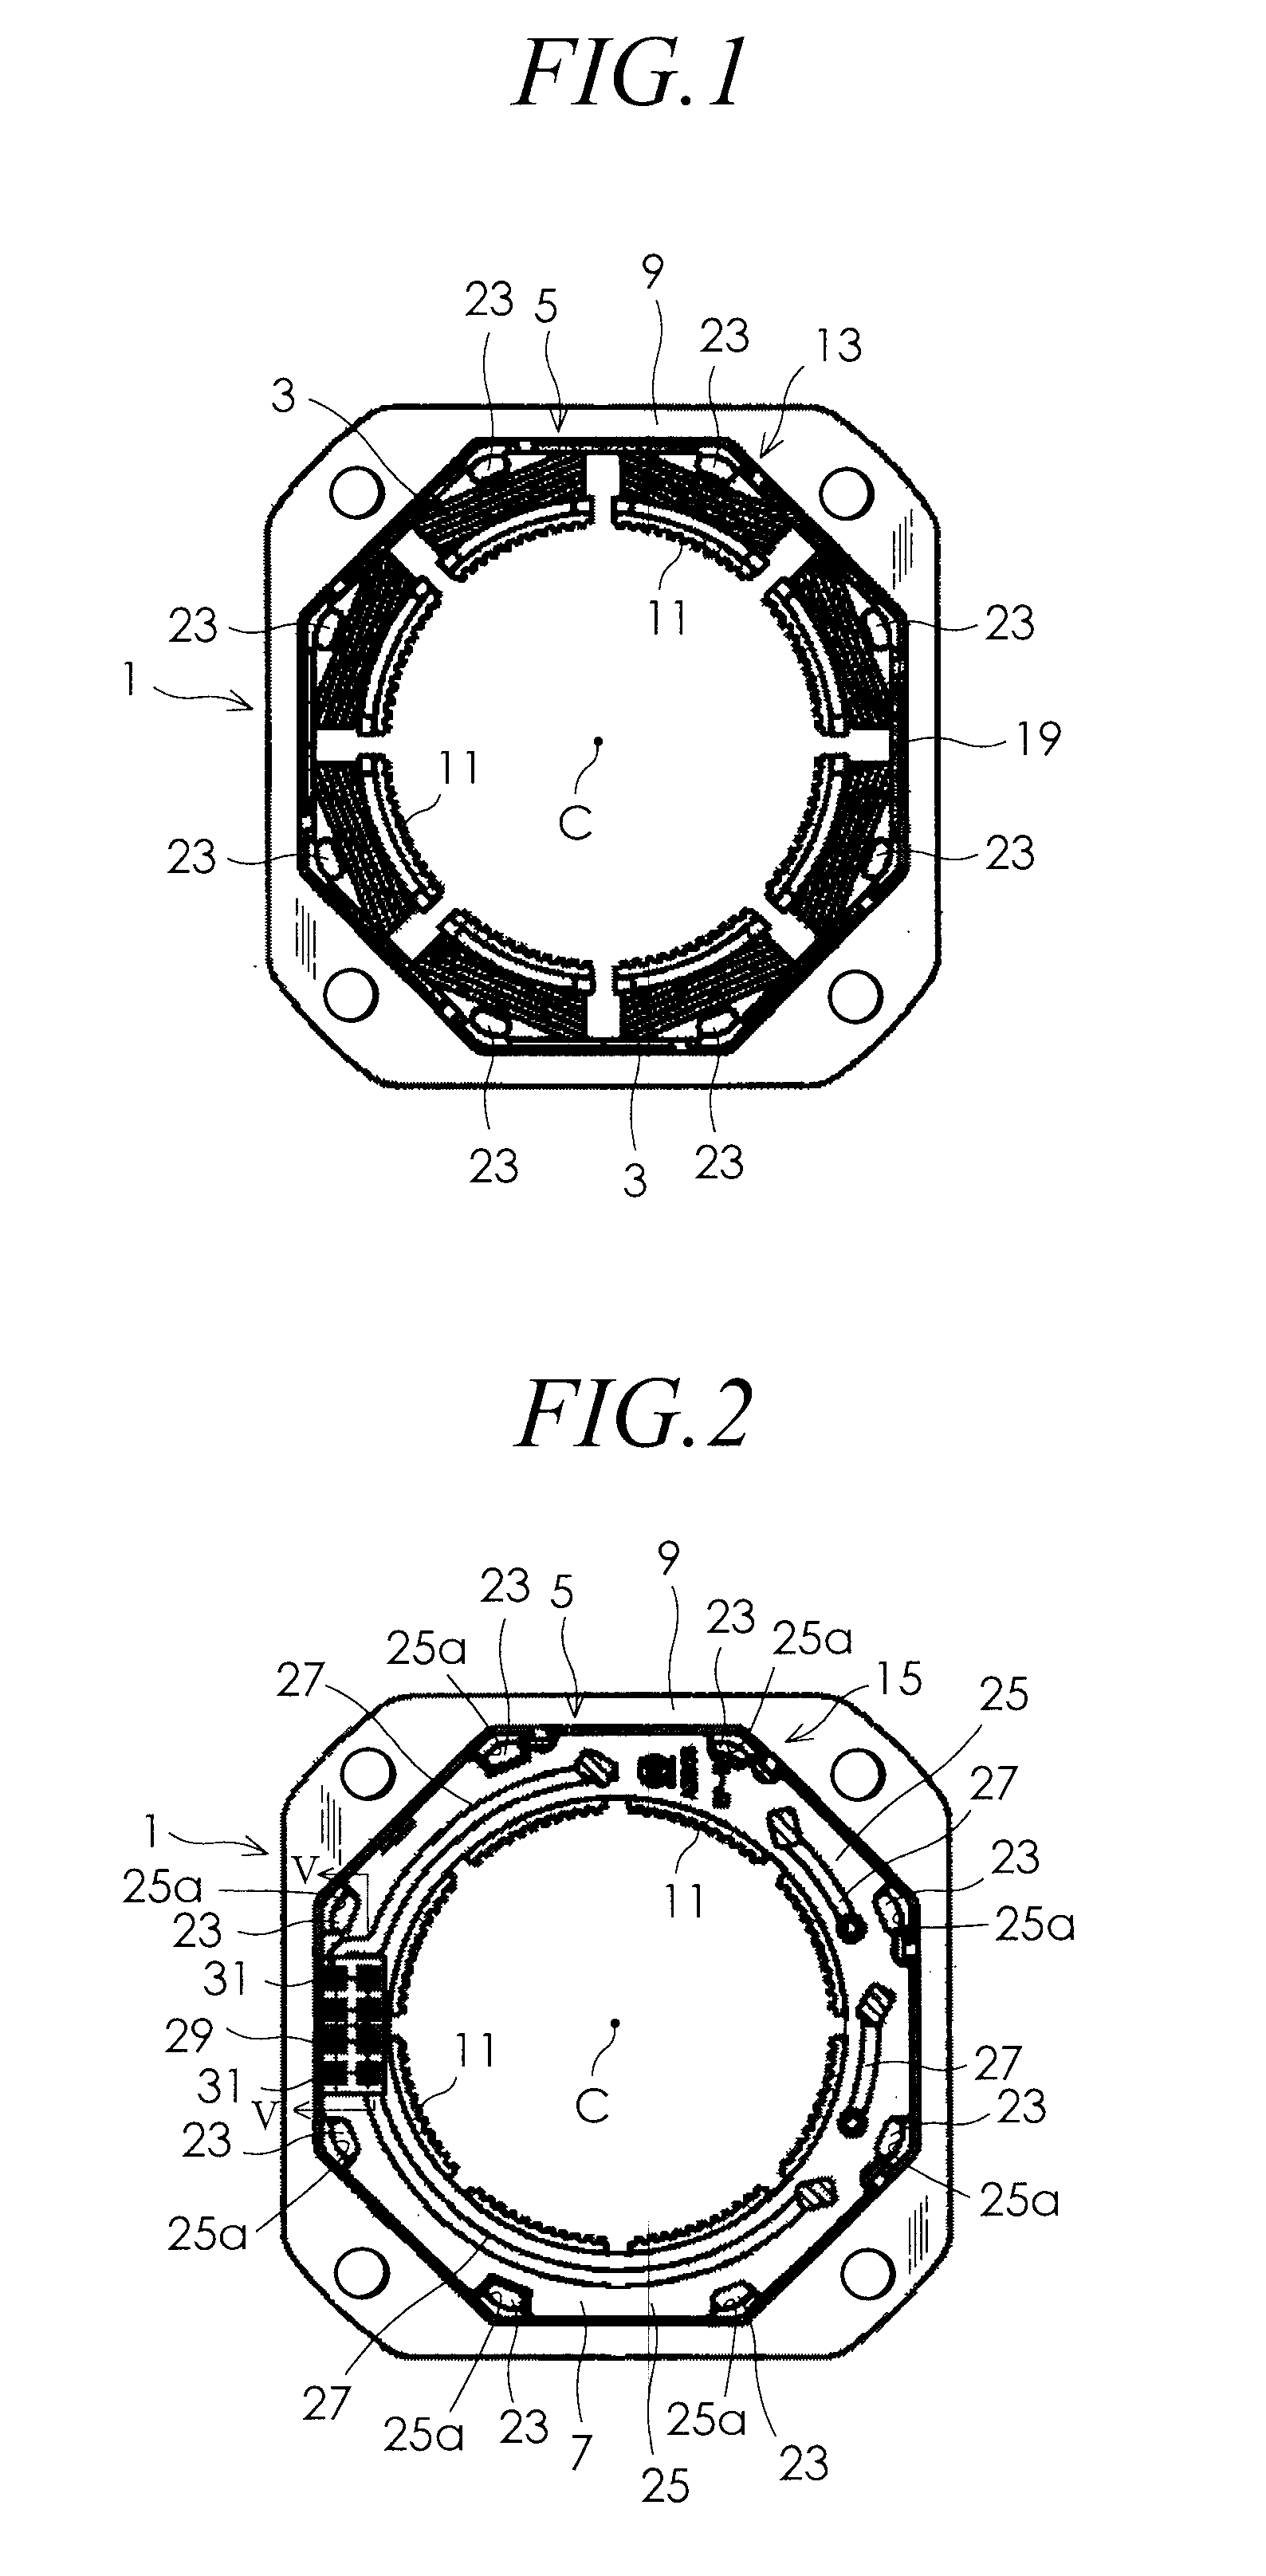 Stator for rotary electric machines